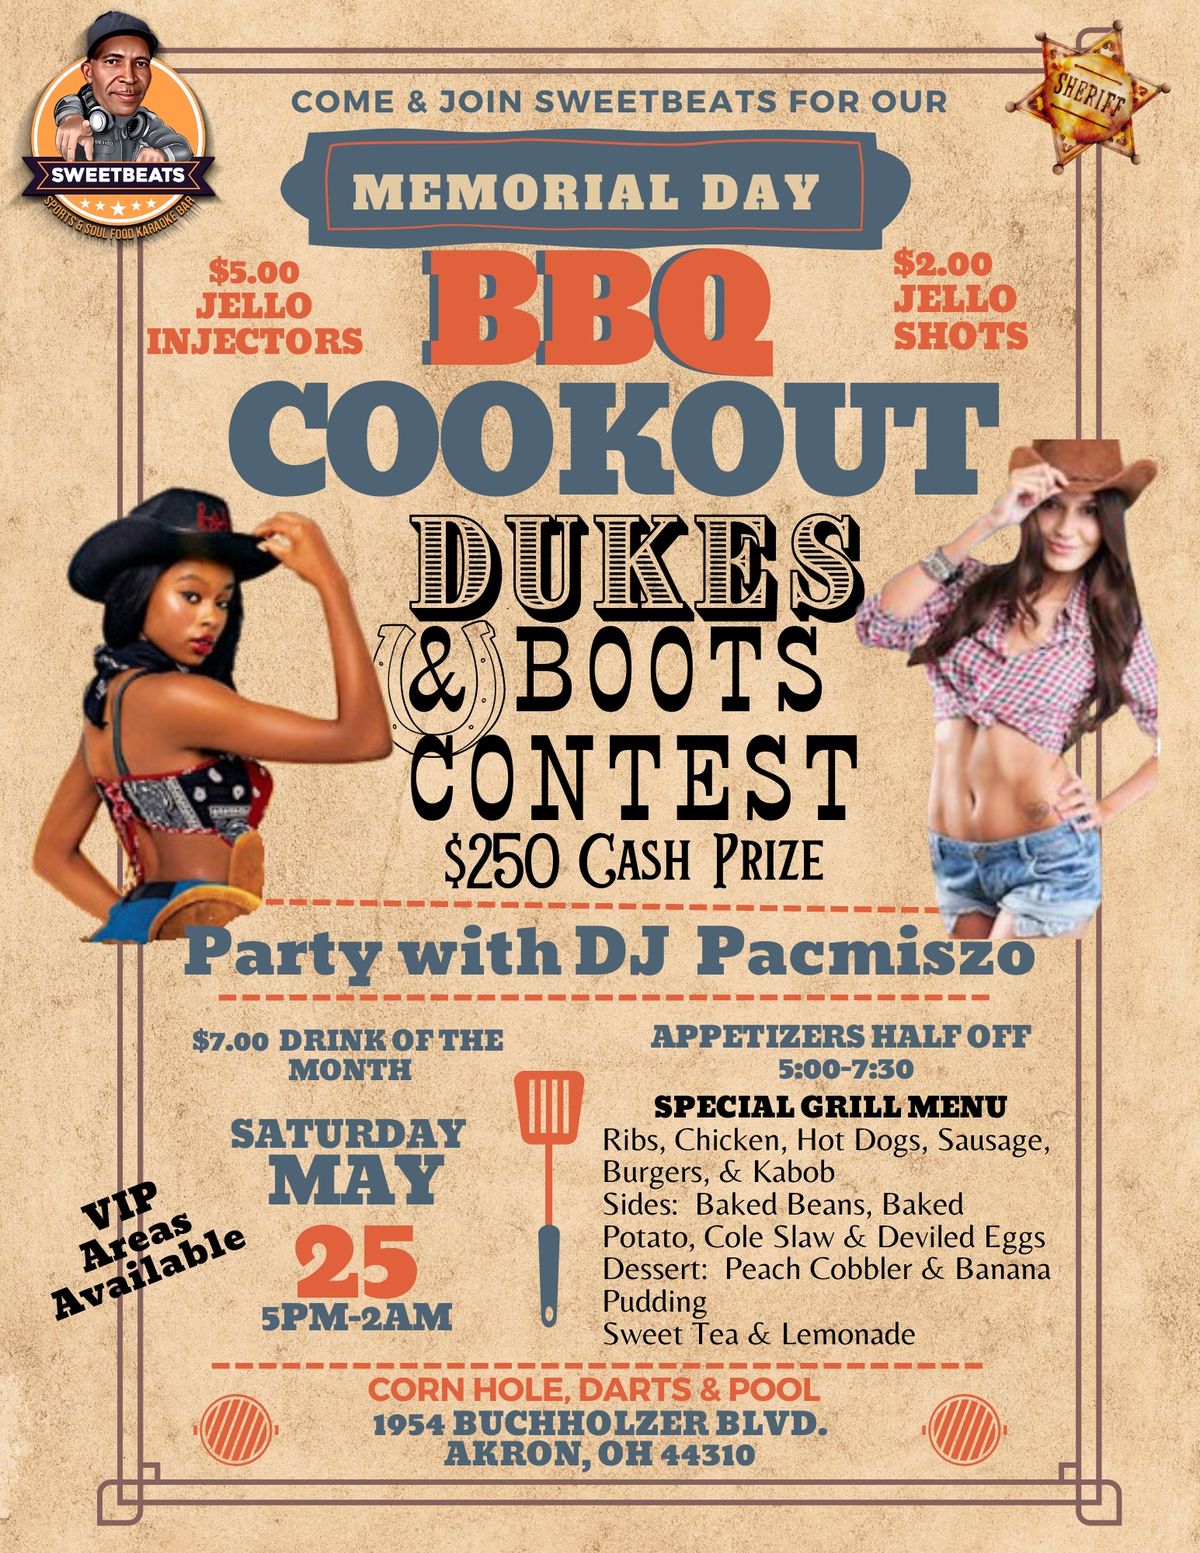 MEMORIAL DAY COOKOUT: DUKES AND BOOTS